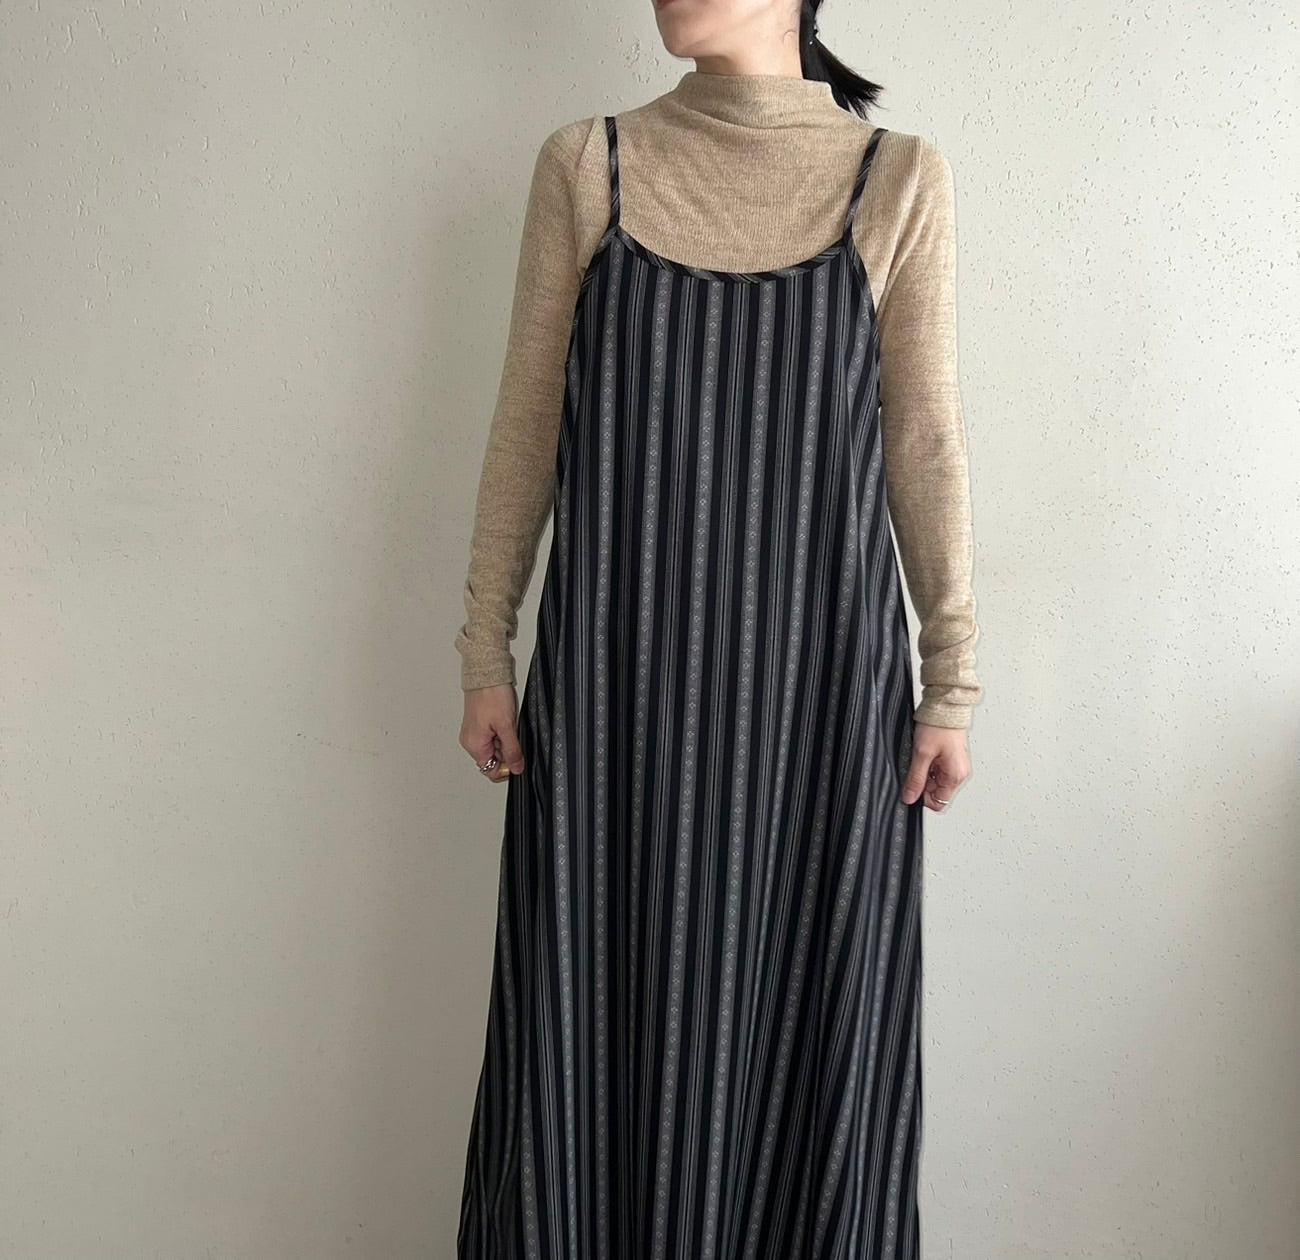 90s Striped  Dress Made in USA